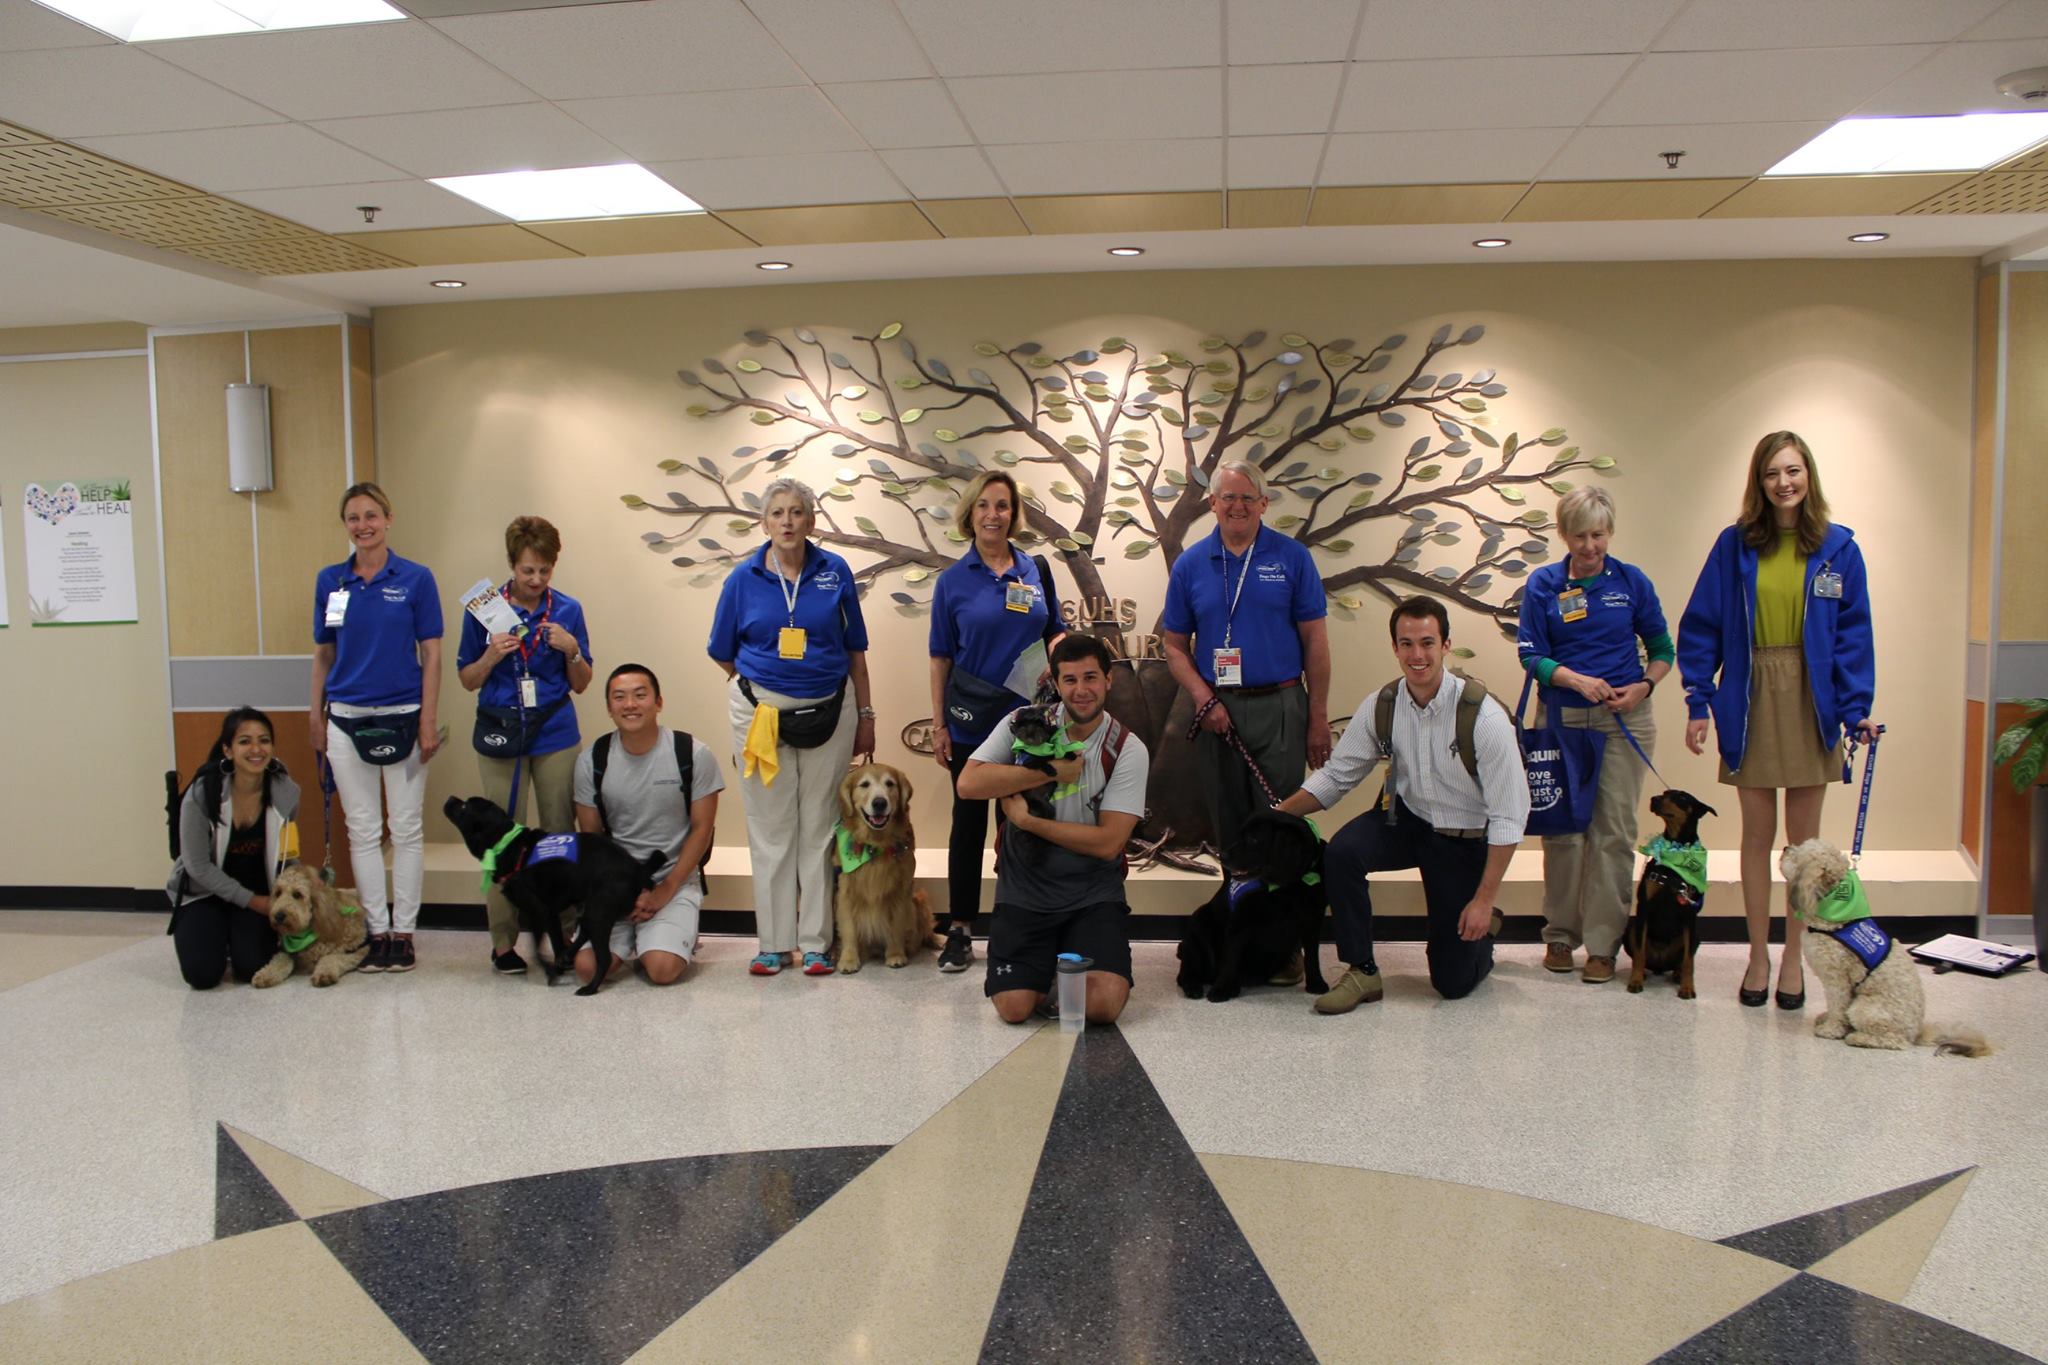 Blue and Green Day with VCU Hume-Lee Transplant Center